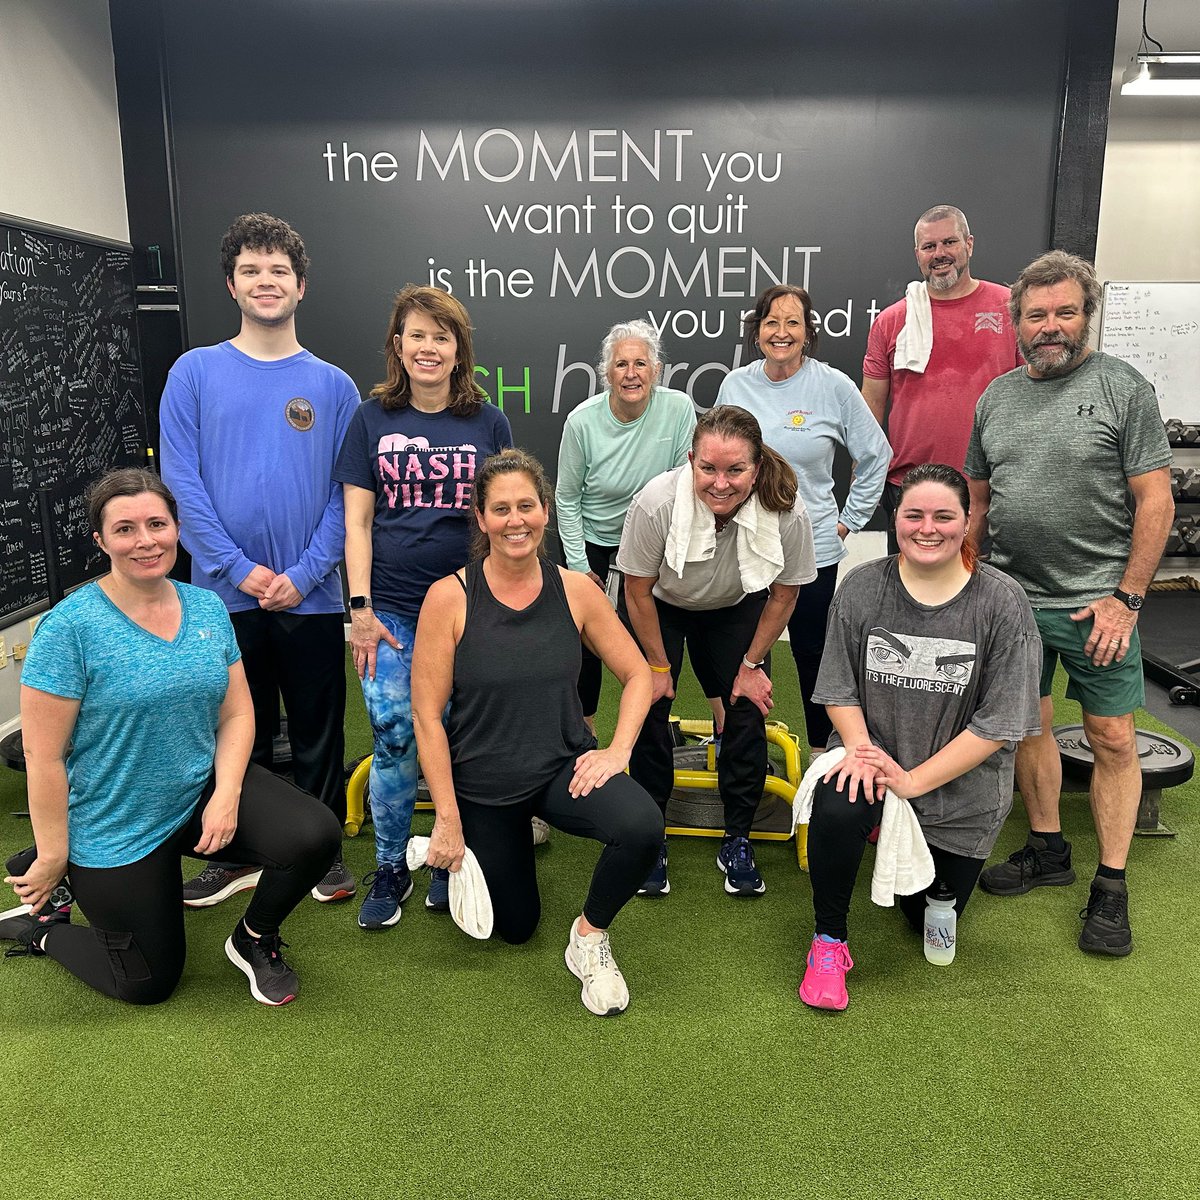 Celebrating our girl Chrissy today!! Happy birthday to one of the strongest women we know! 💪💪 #iron_phoenix_fitness #workout #gym #downtownromega